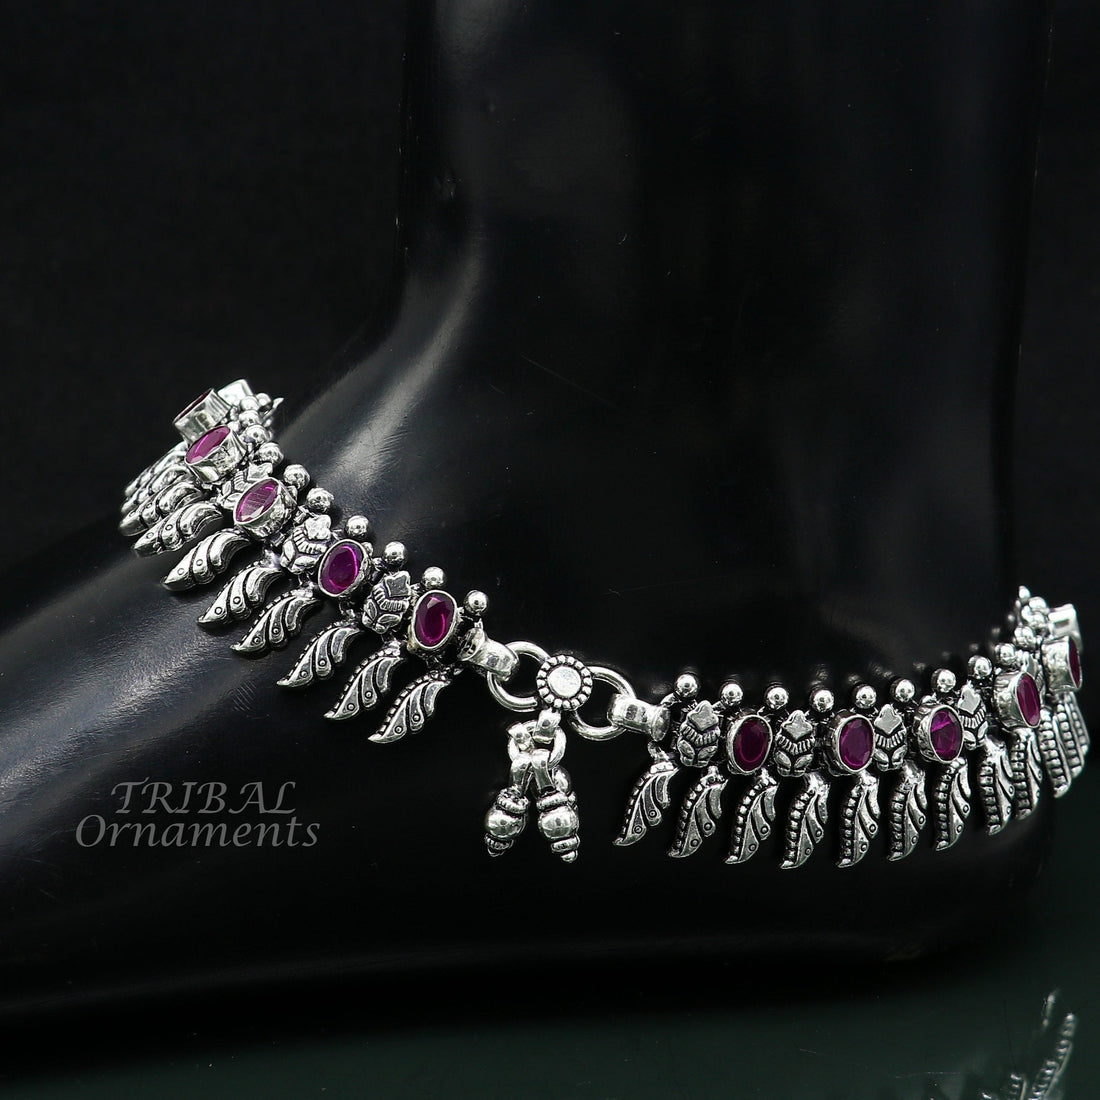 10.5" Inches long handmade 925 sterling silver fabulous color stone customized anklet bracelet, amazing anklets belly dance jewelry ank524 - TRIBAL ORNAMENTS